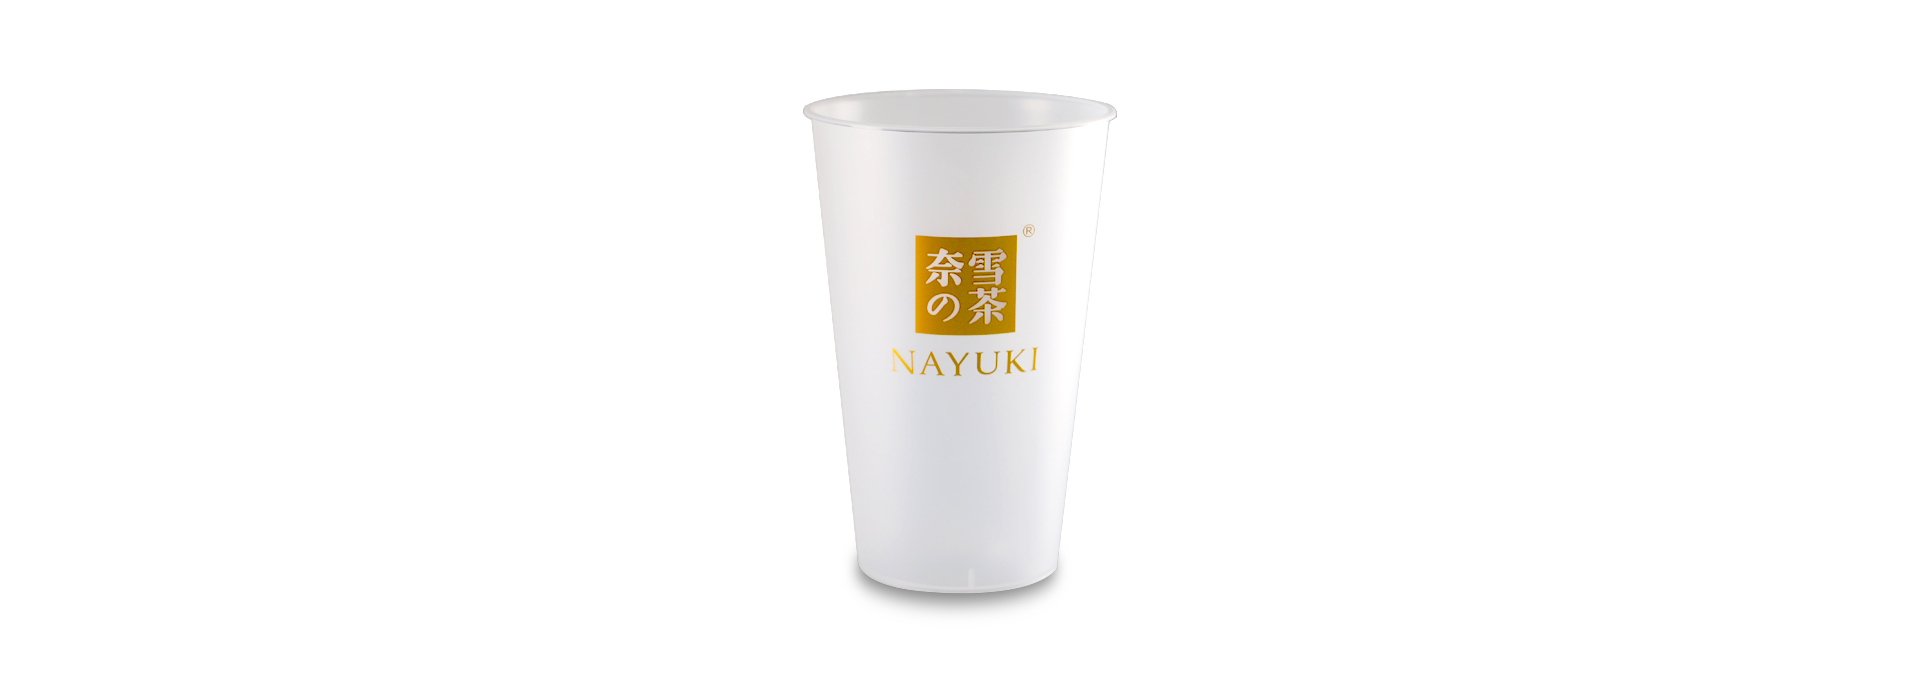 500g Cup